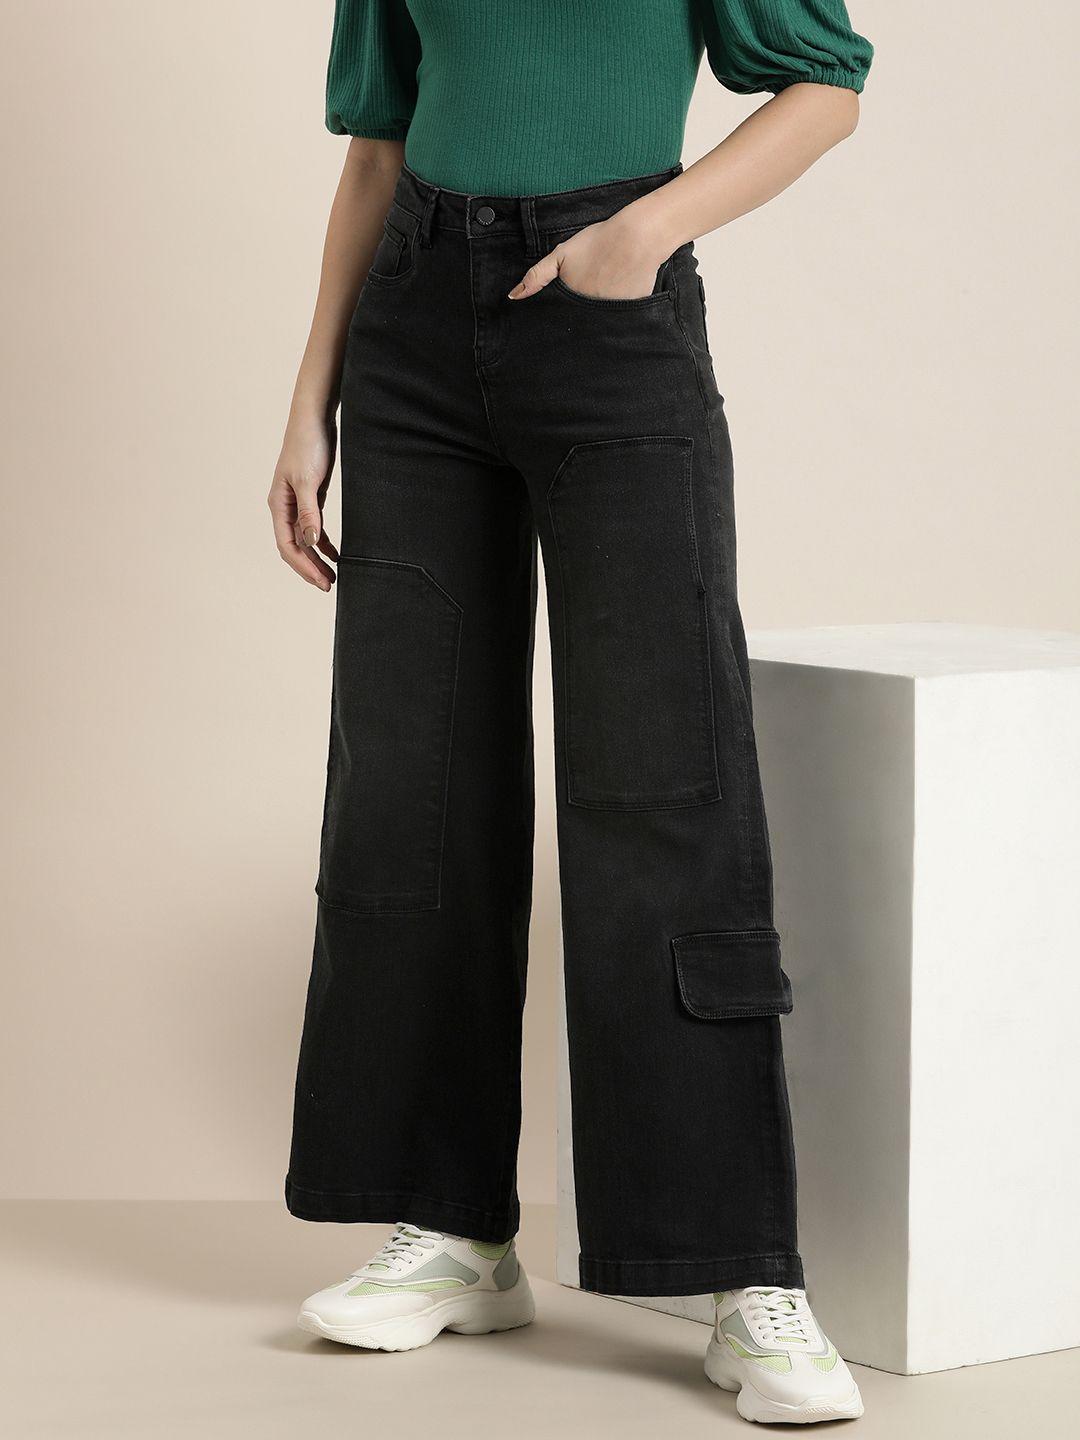 here&now-women-wide-leg-light-fade-stretchable-mid-rise-jeans